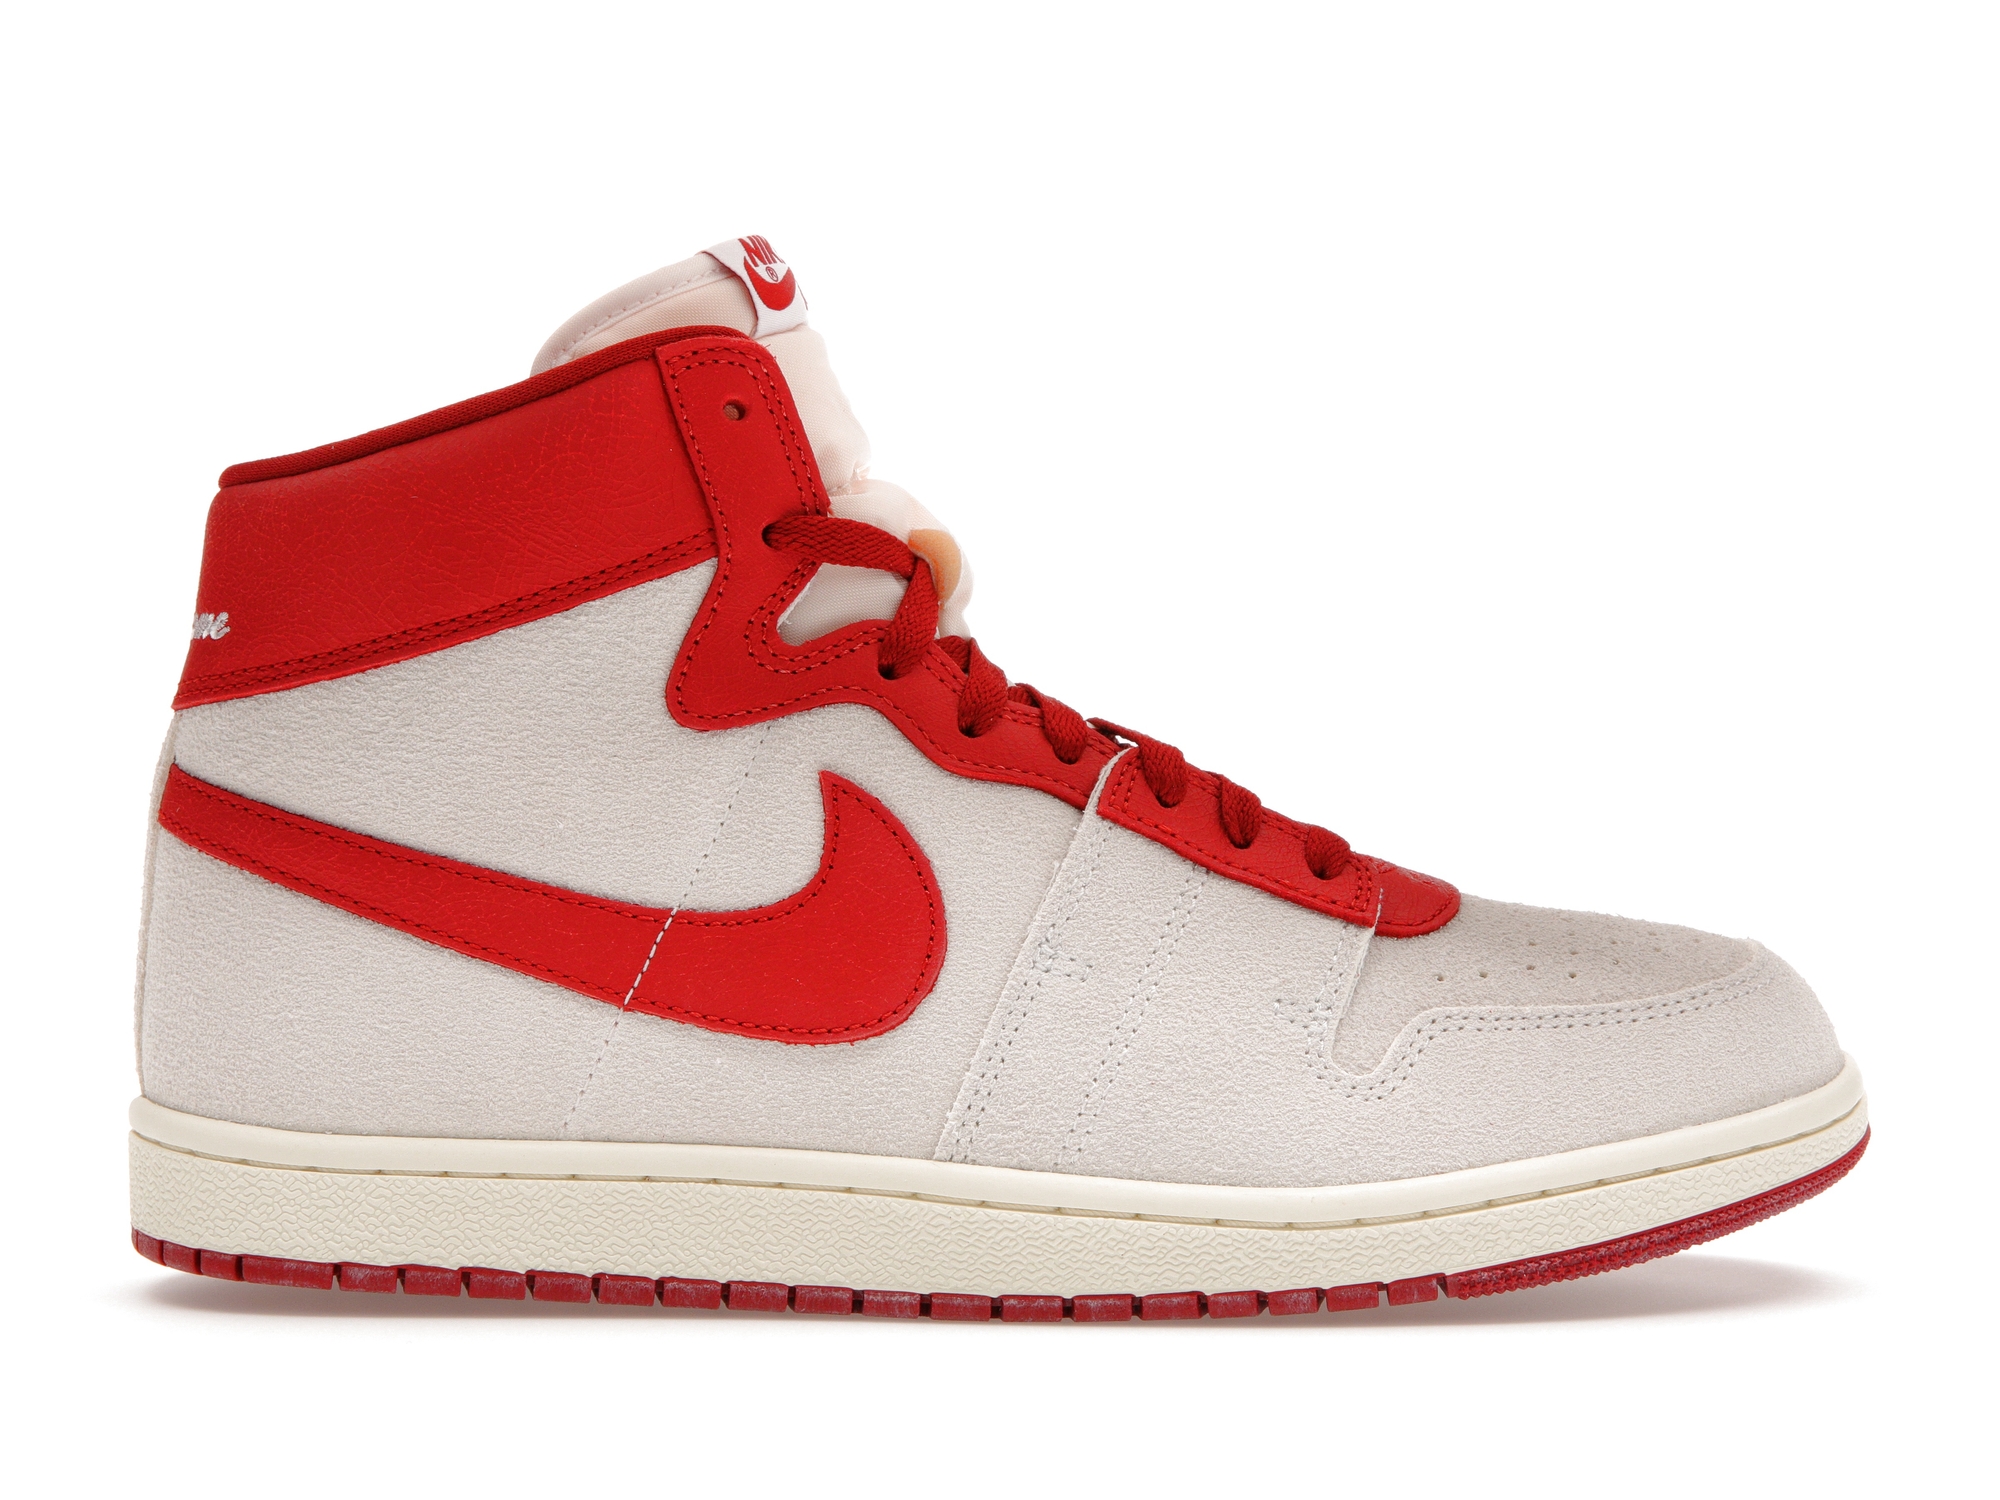 Nike Air Ship SP Every Game Dune Red